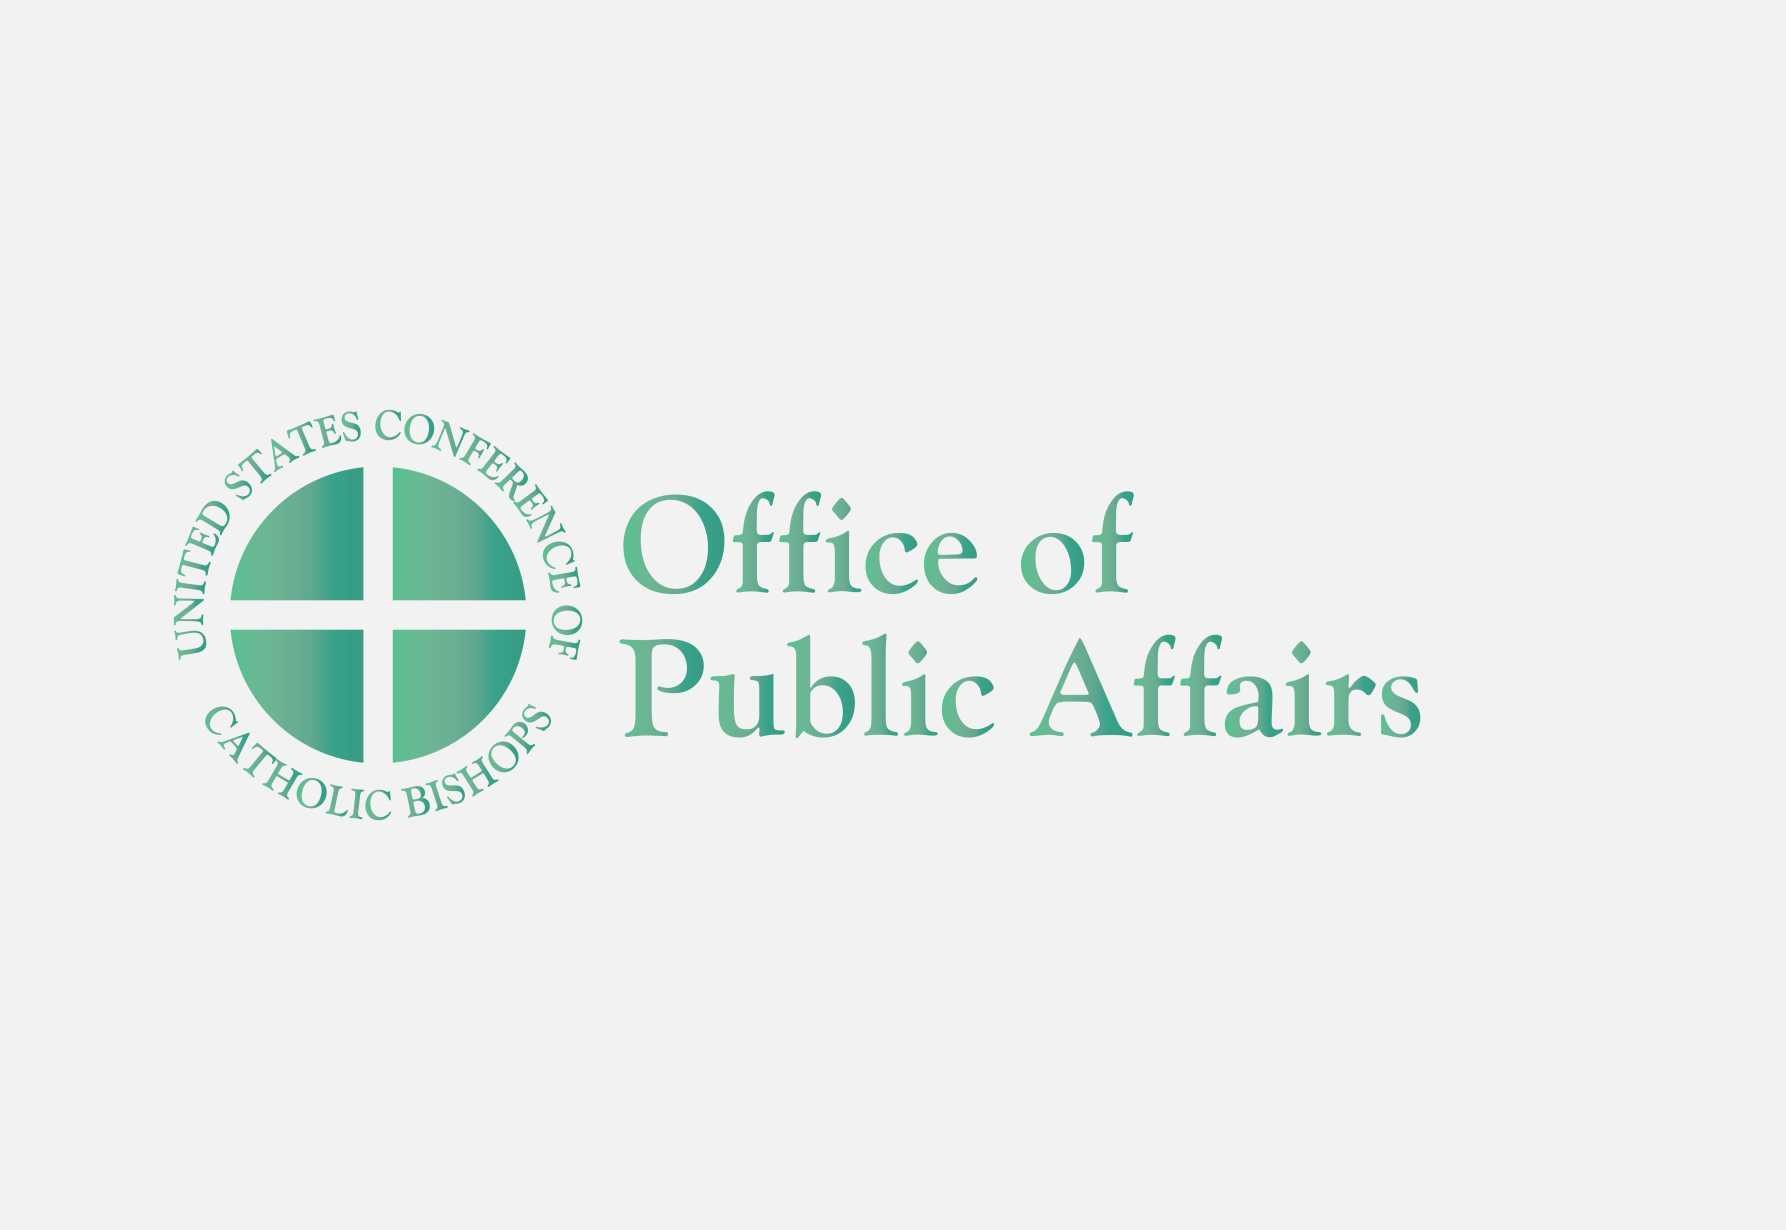 Statement of U.S. Bishops’ Family Life Committee Chairman on FDA Approval of Over-the-Counter Oral Contraceptive